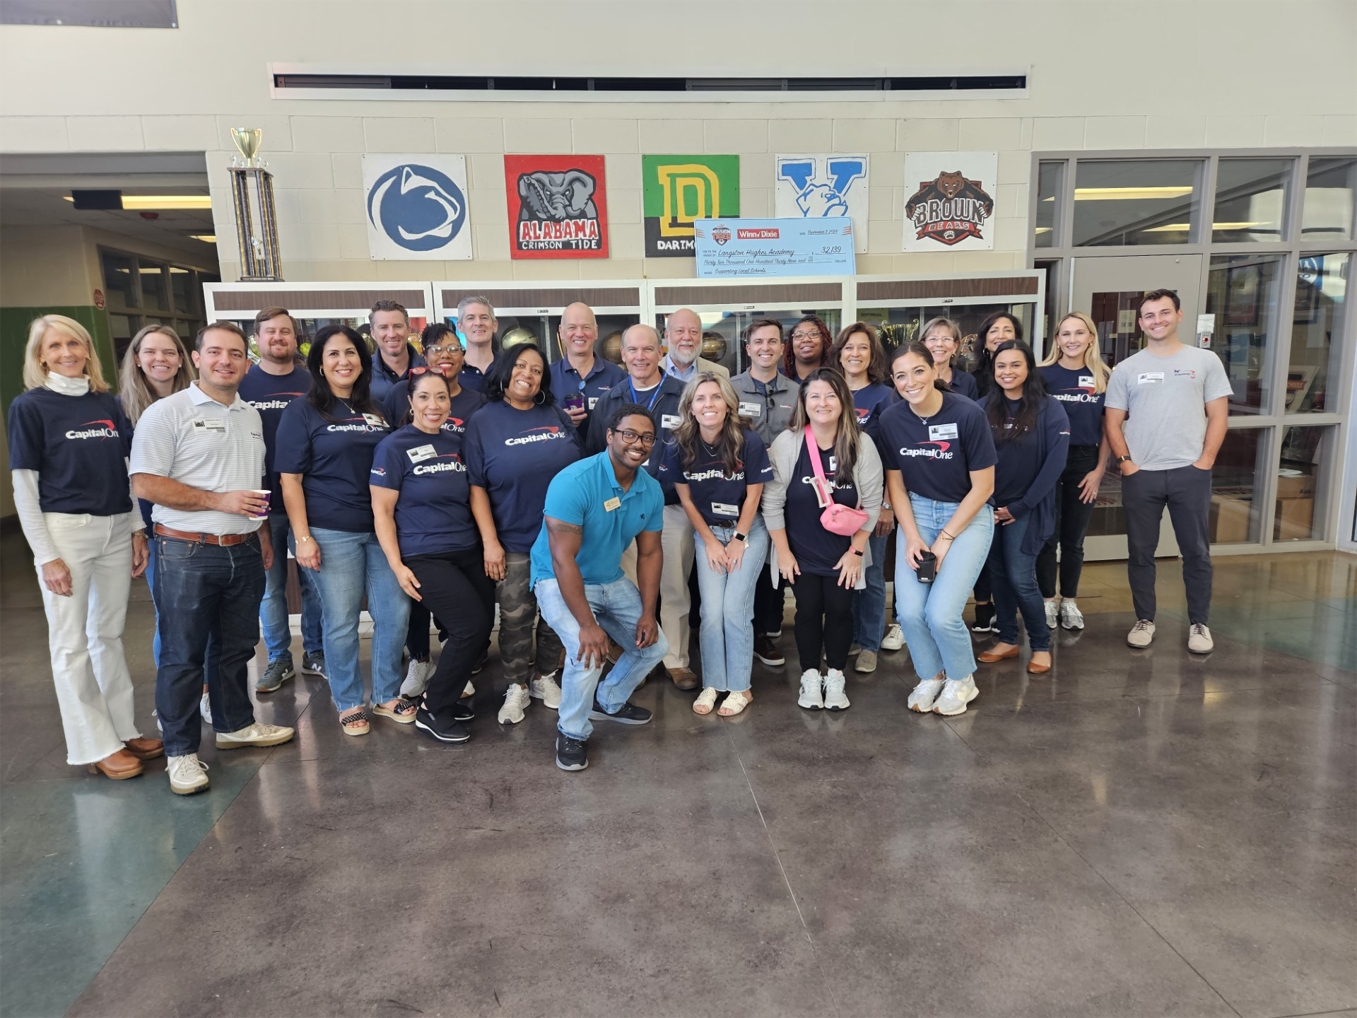 Associates in Corporate Banking partnered with Junior Achievement (JA) of Greater New Orleans to teach JA in a Day curriculum to Langston Hughes Elementary Students.